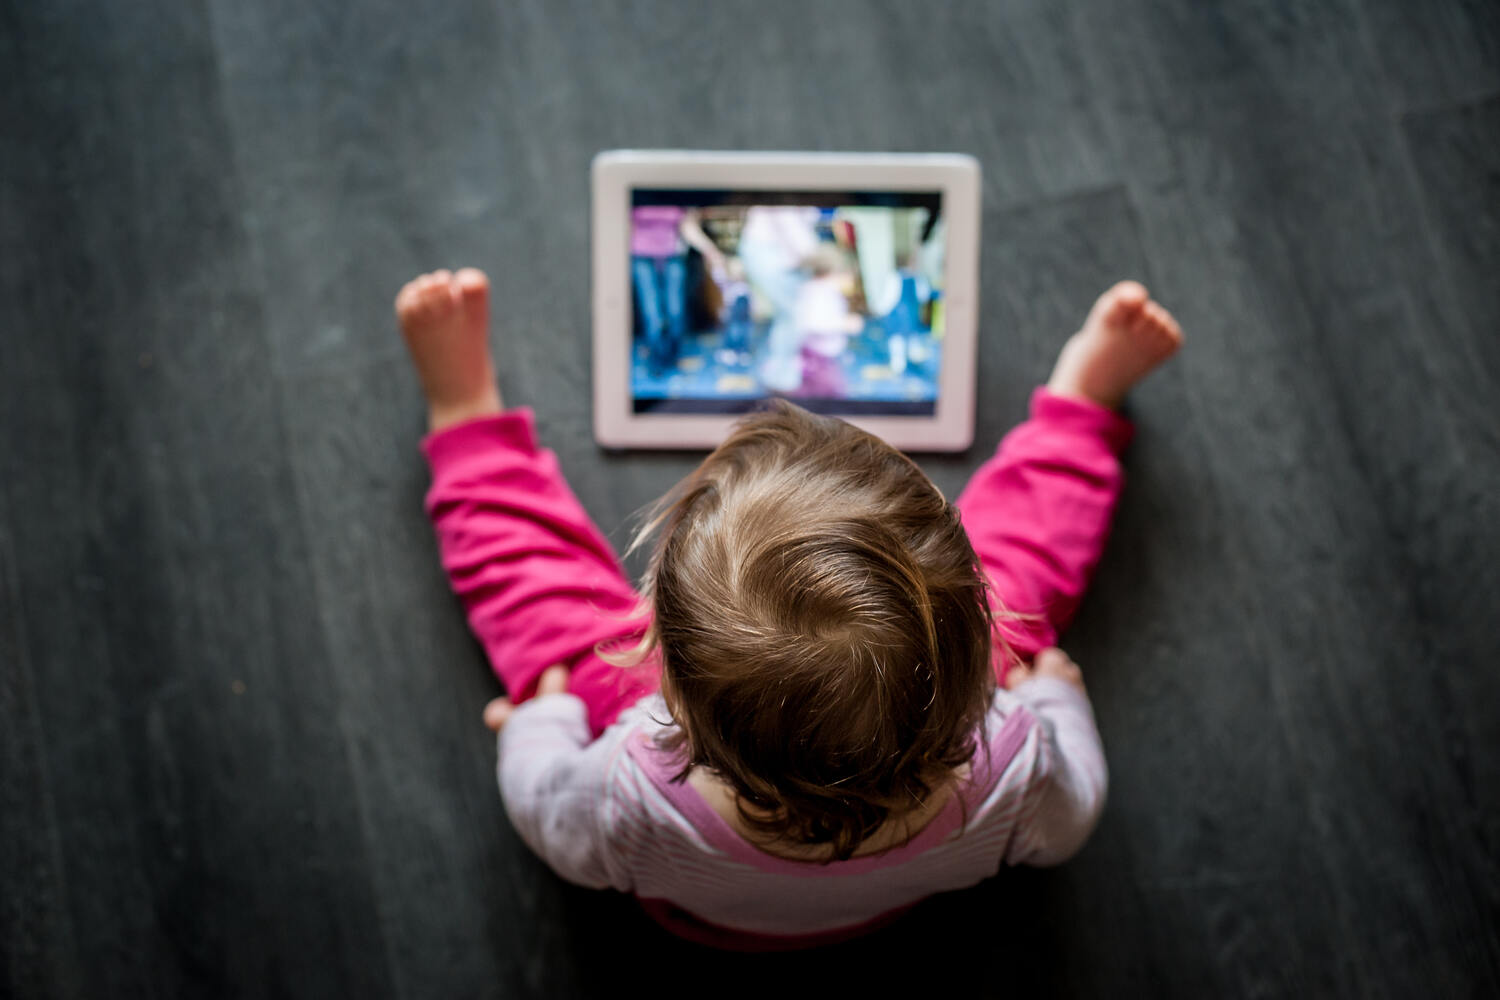 Toddlers should have less screen time and more physical activity